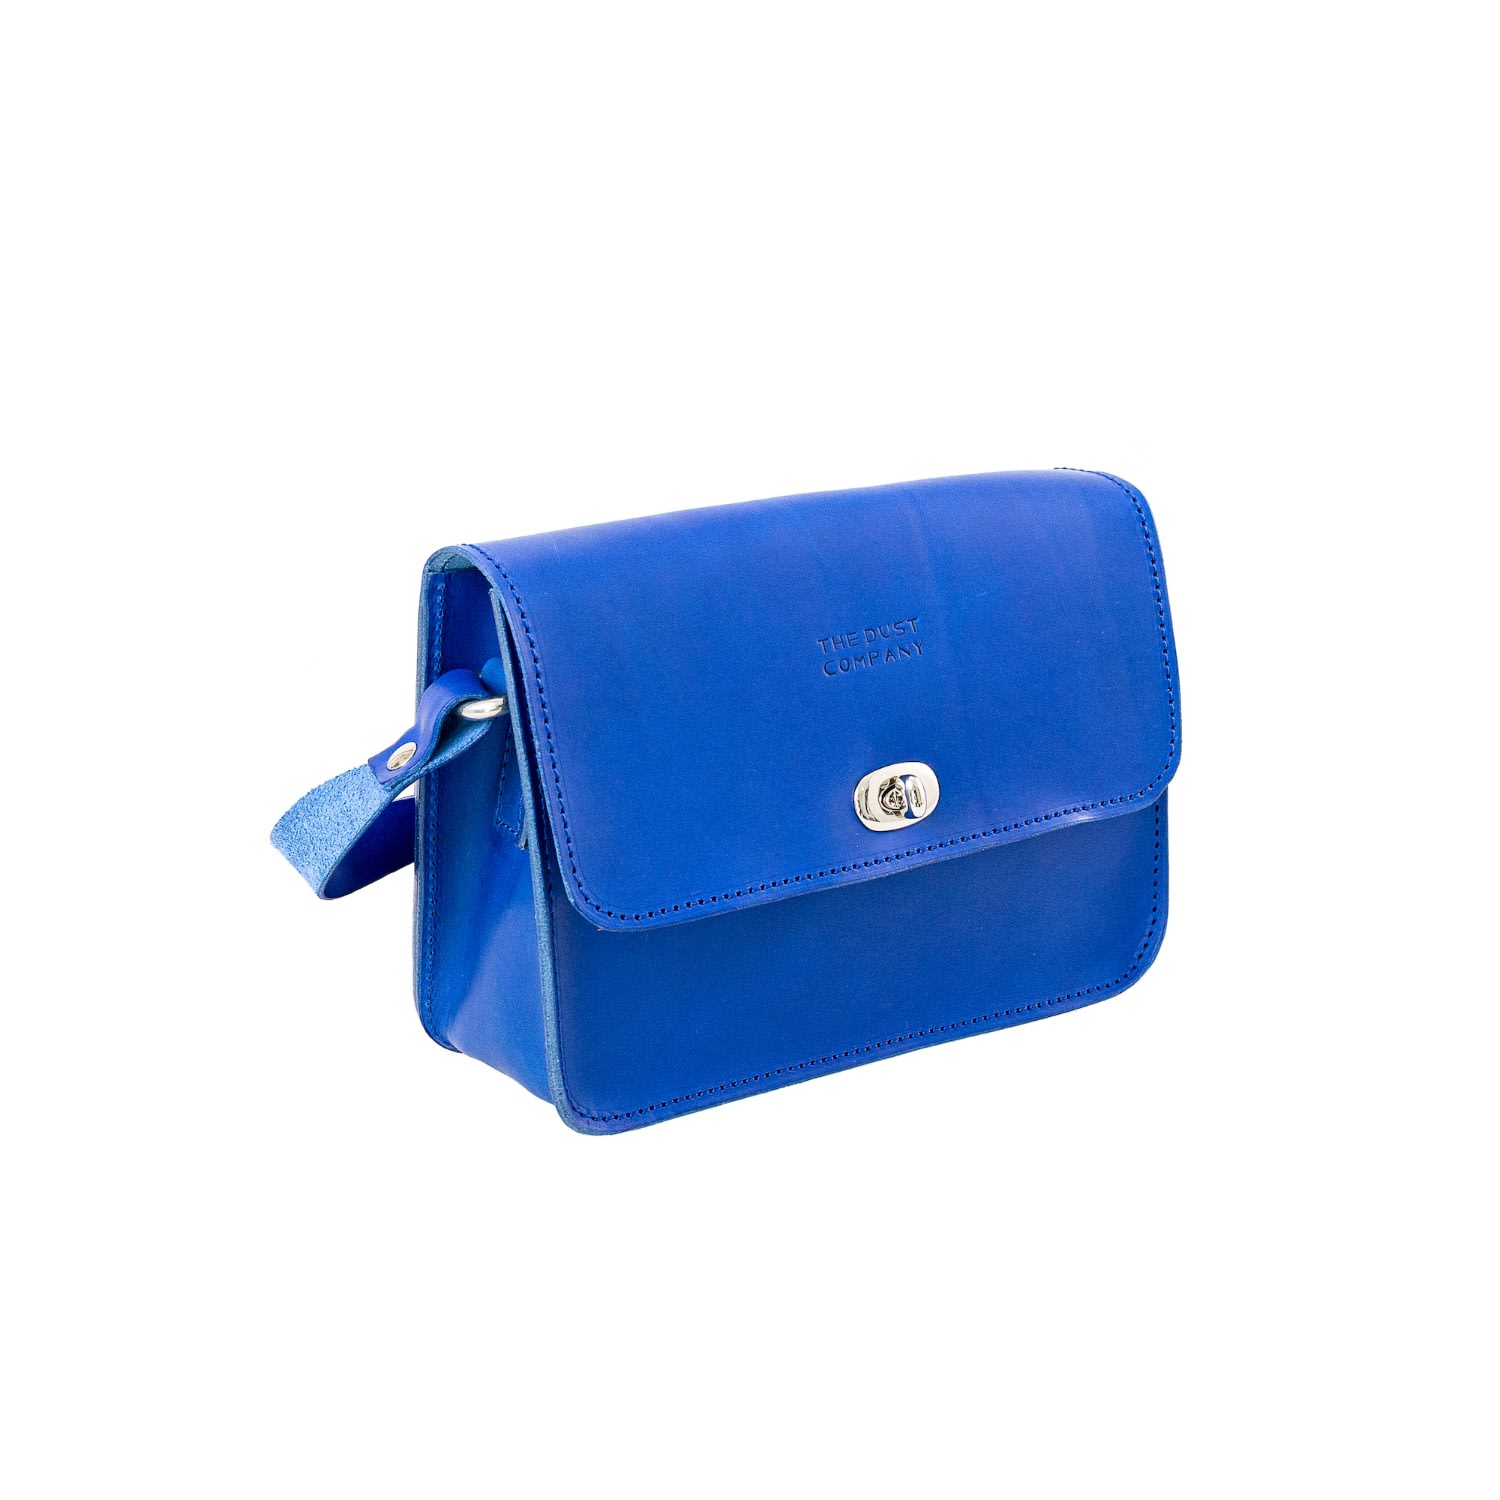 Women’s Leather Crossbody In Cuoio Blue The Dust Company